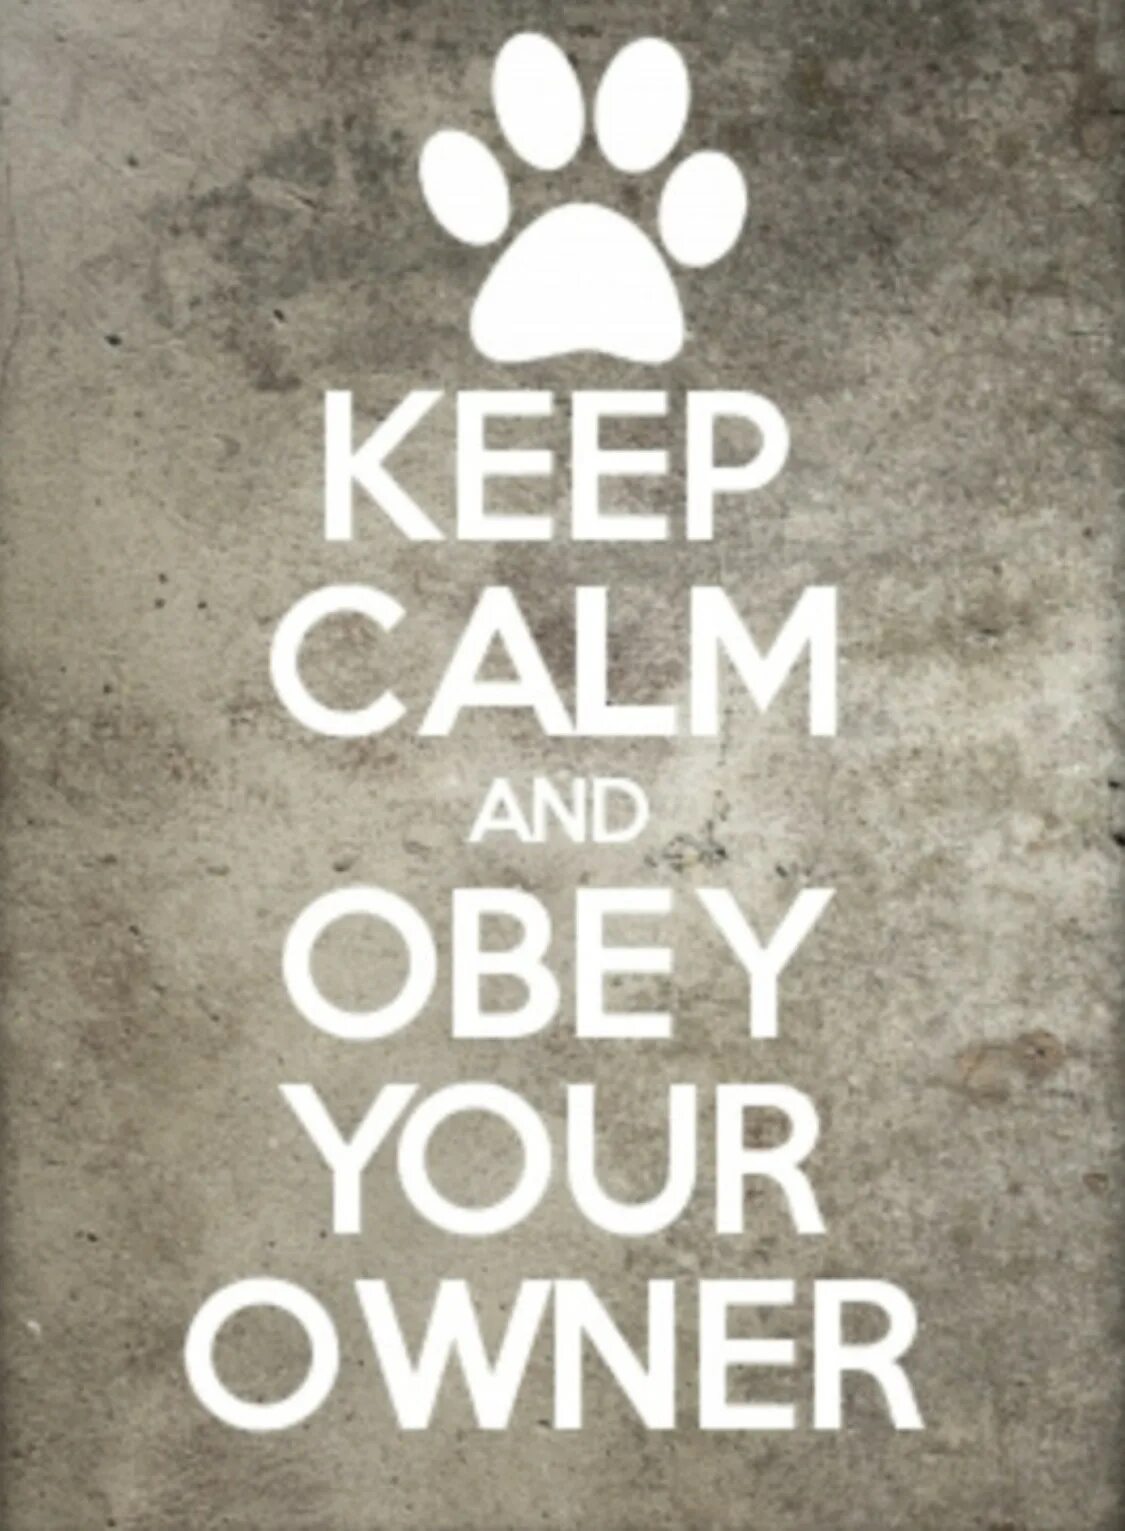 Keep Calm and Obey. Keep Calm and Obey your wife. Keep Sweet: Pray and Obey. Calm down and Breath. Made him stay